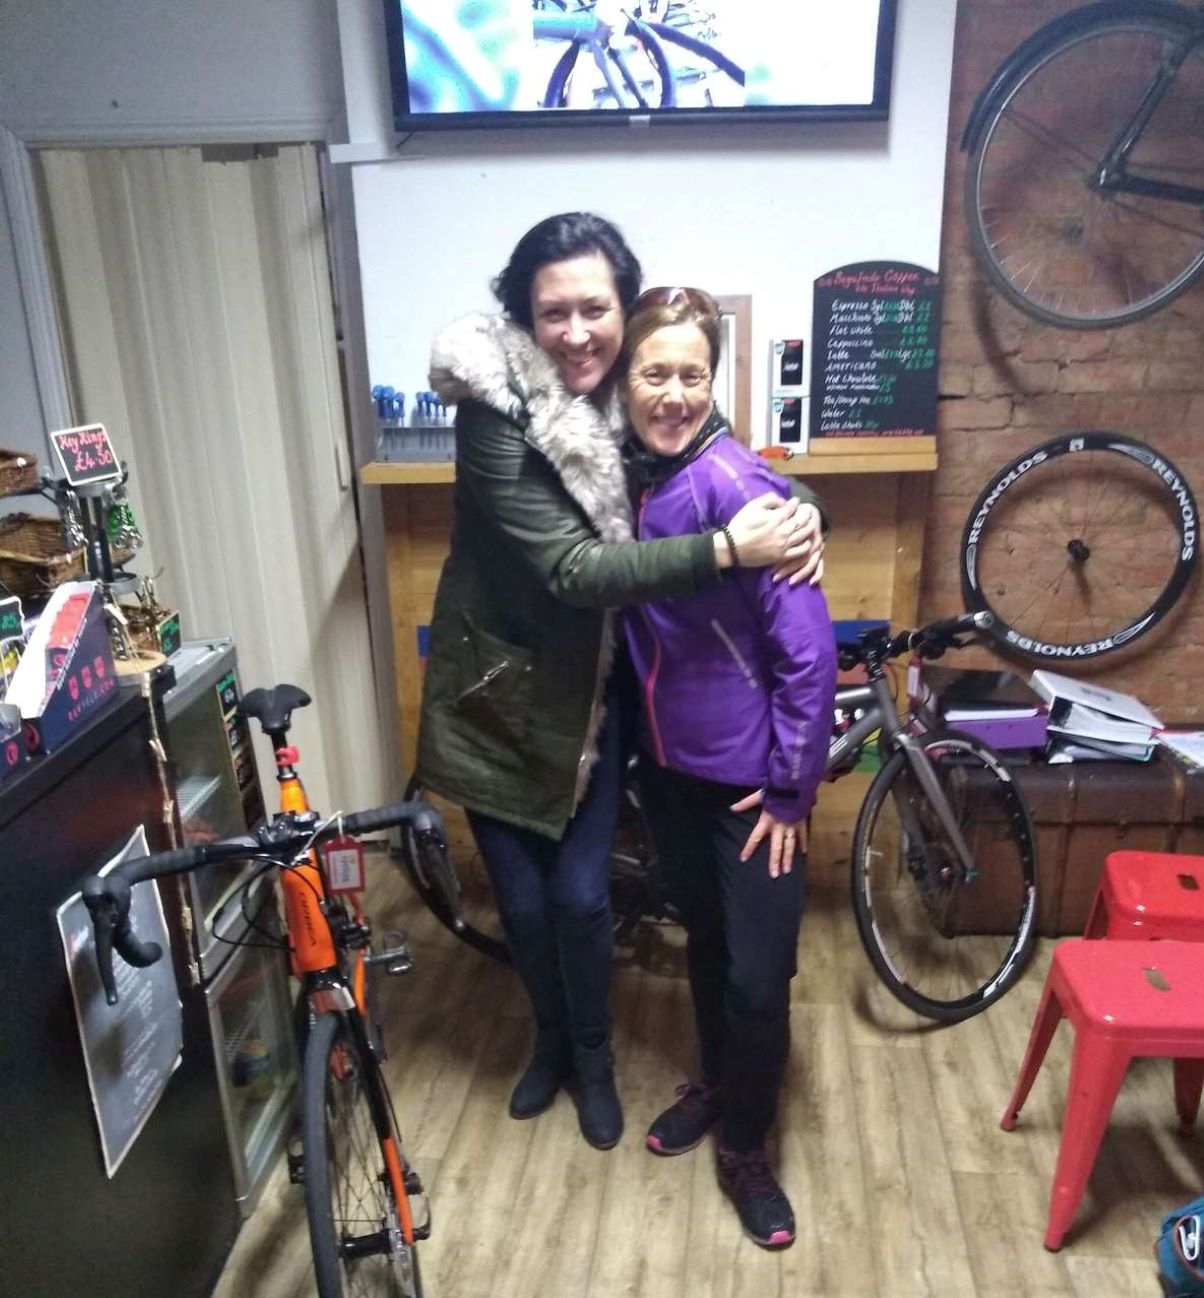 A woman in a green coat and a woman in a purple fleece pictured together in a crowded room with bicycles and wheels lining the walls